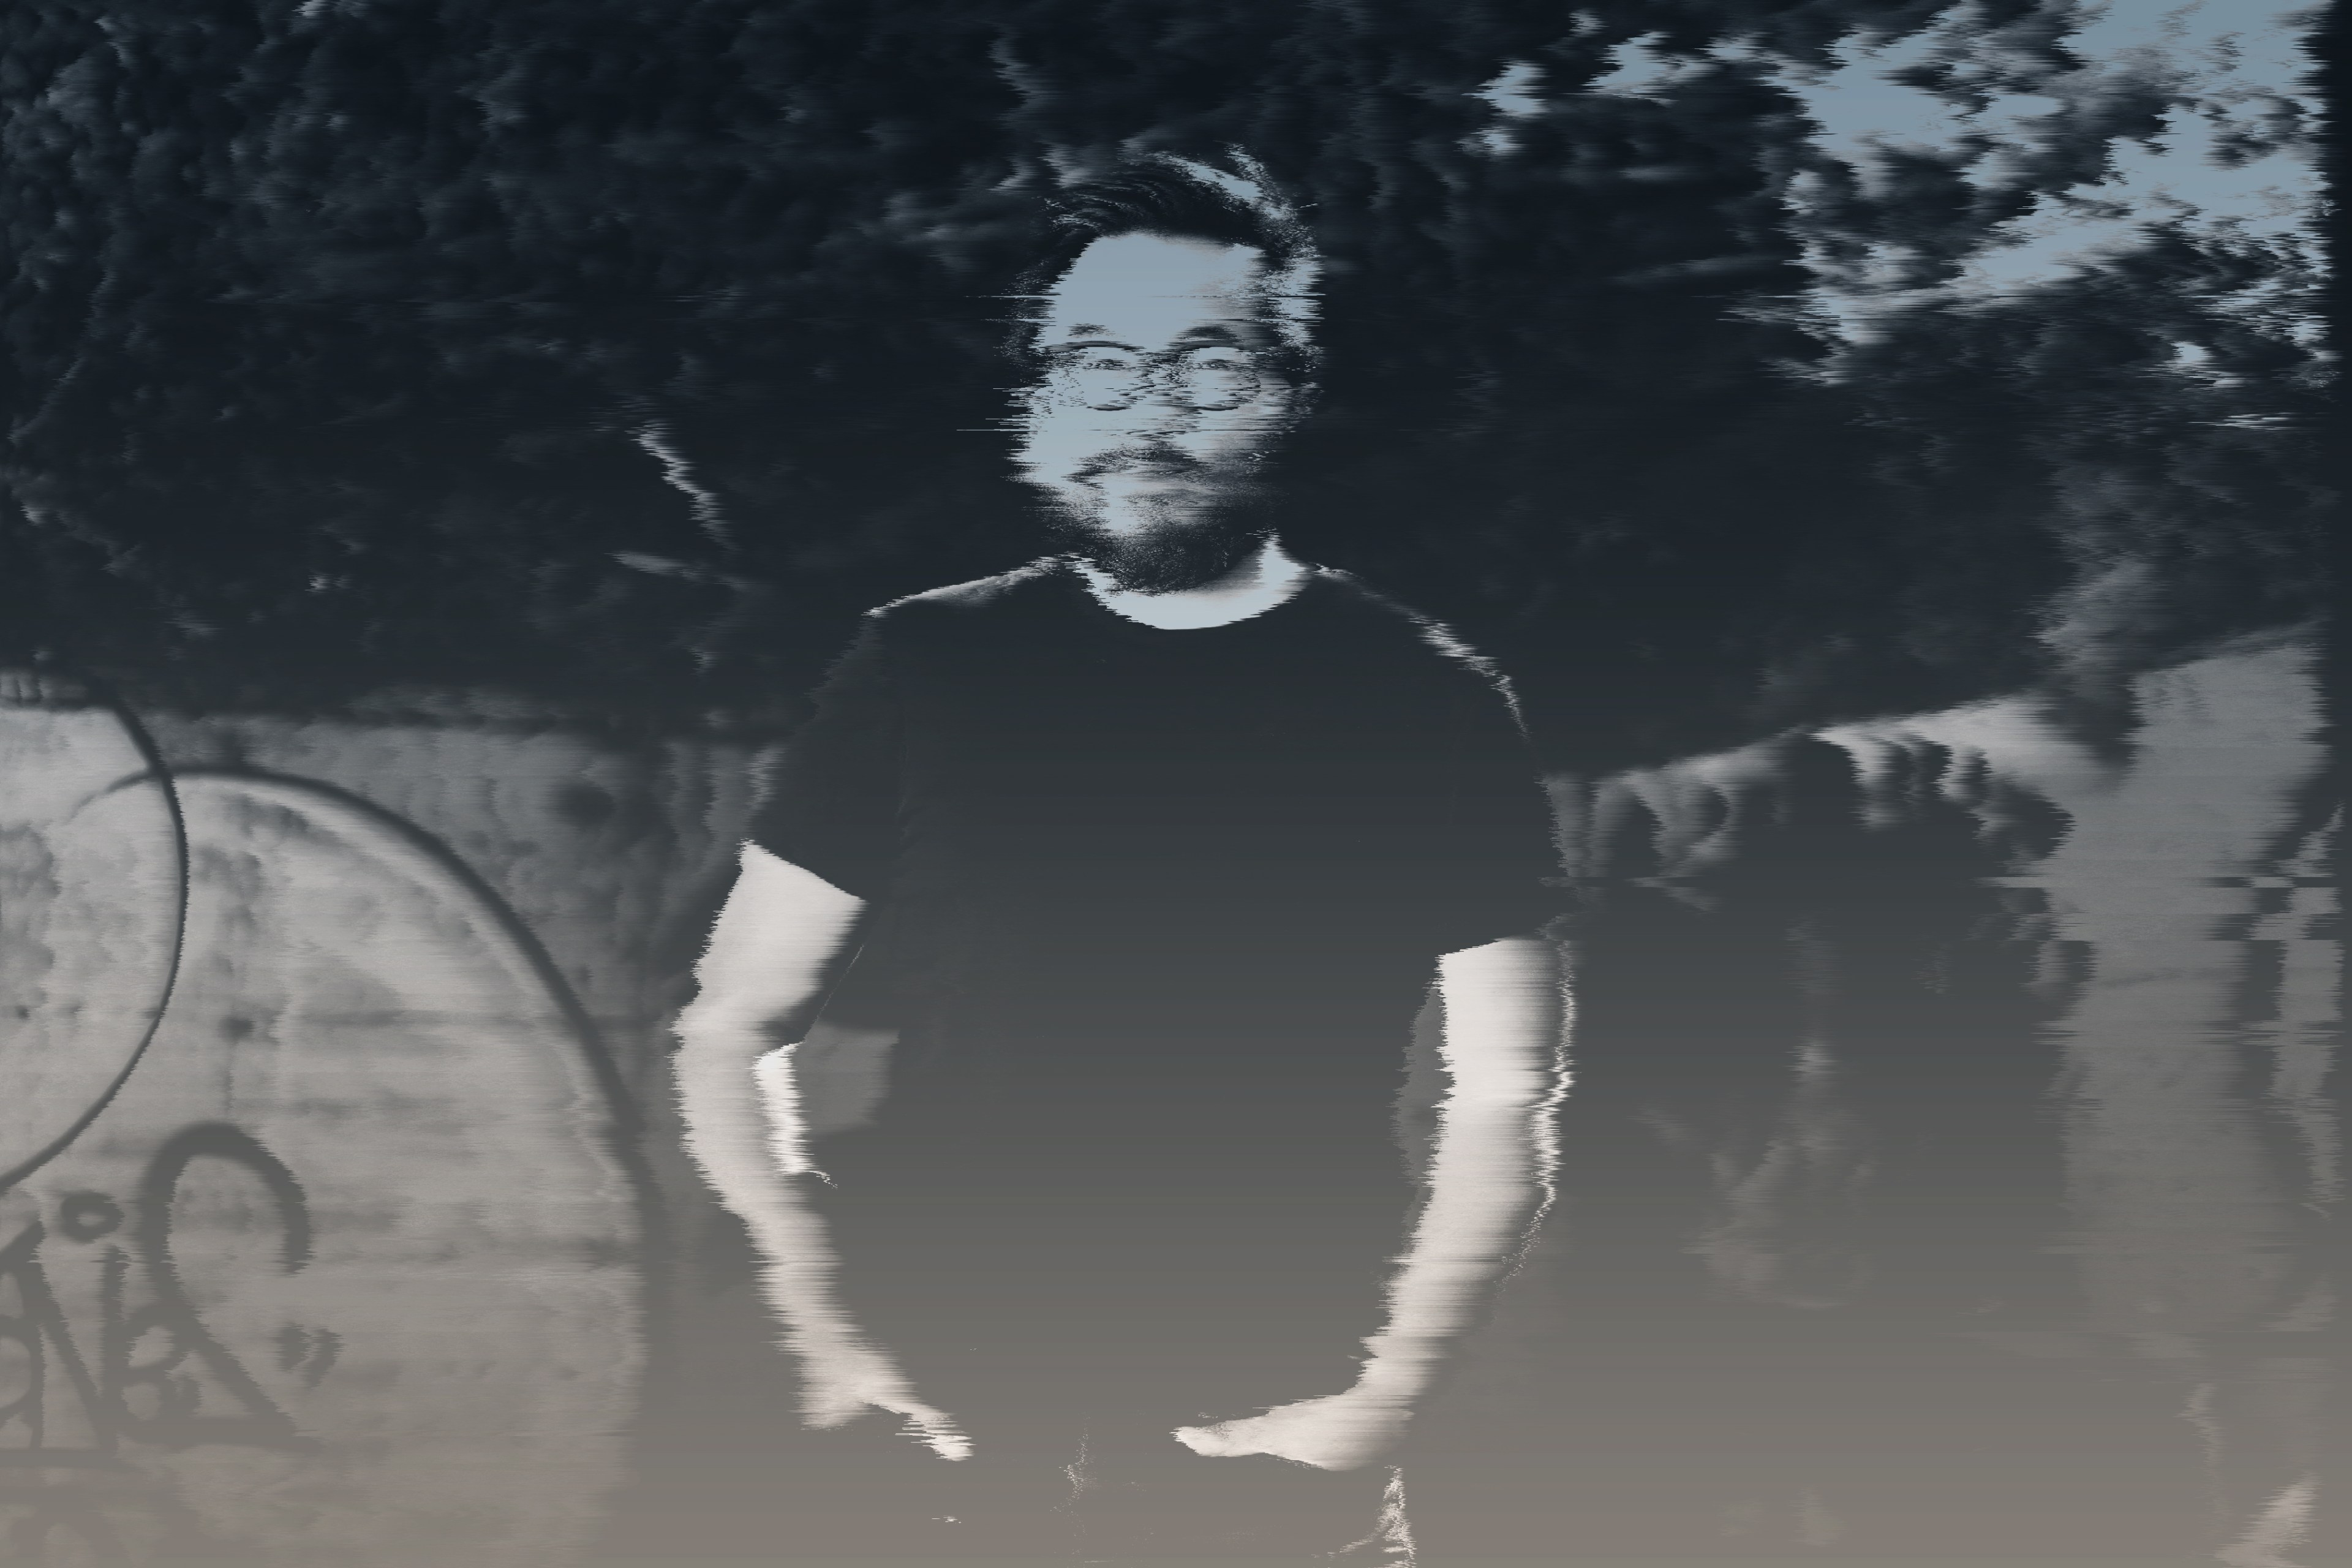 A man with glasses and a beard stands in a dim, desaturated setting with graffiti in the background. The image is grainy with a ghostly visual effect.